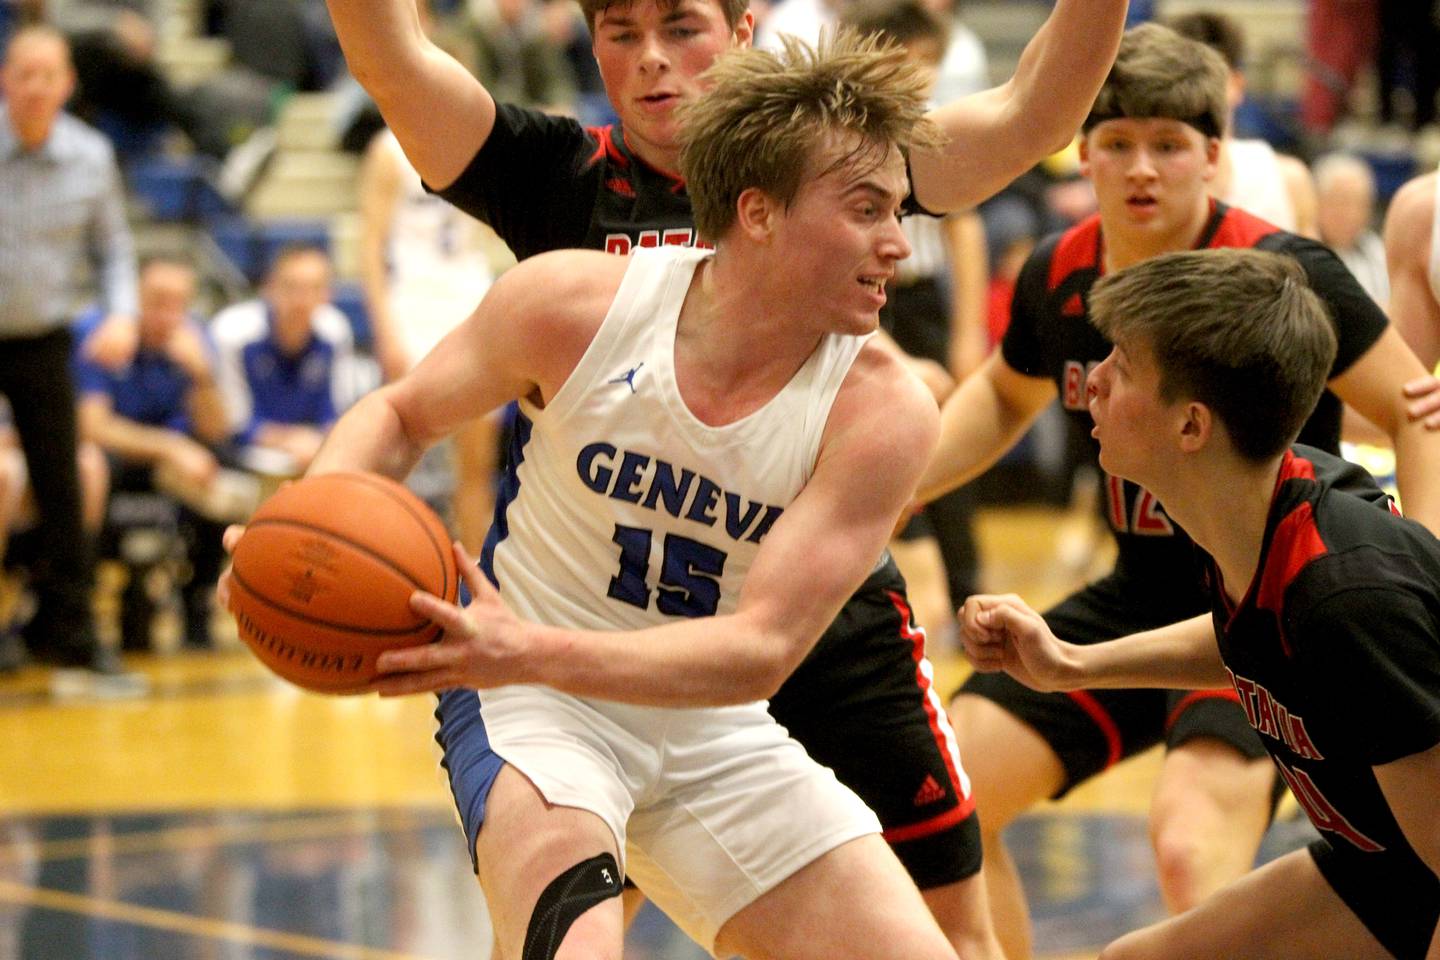 Geneva’s Jimmy Rasmussen looks to pass the ball from under the basket during a game against Batavia at Geneva on Friday, Feb. 3, 2023.